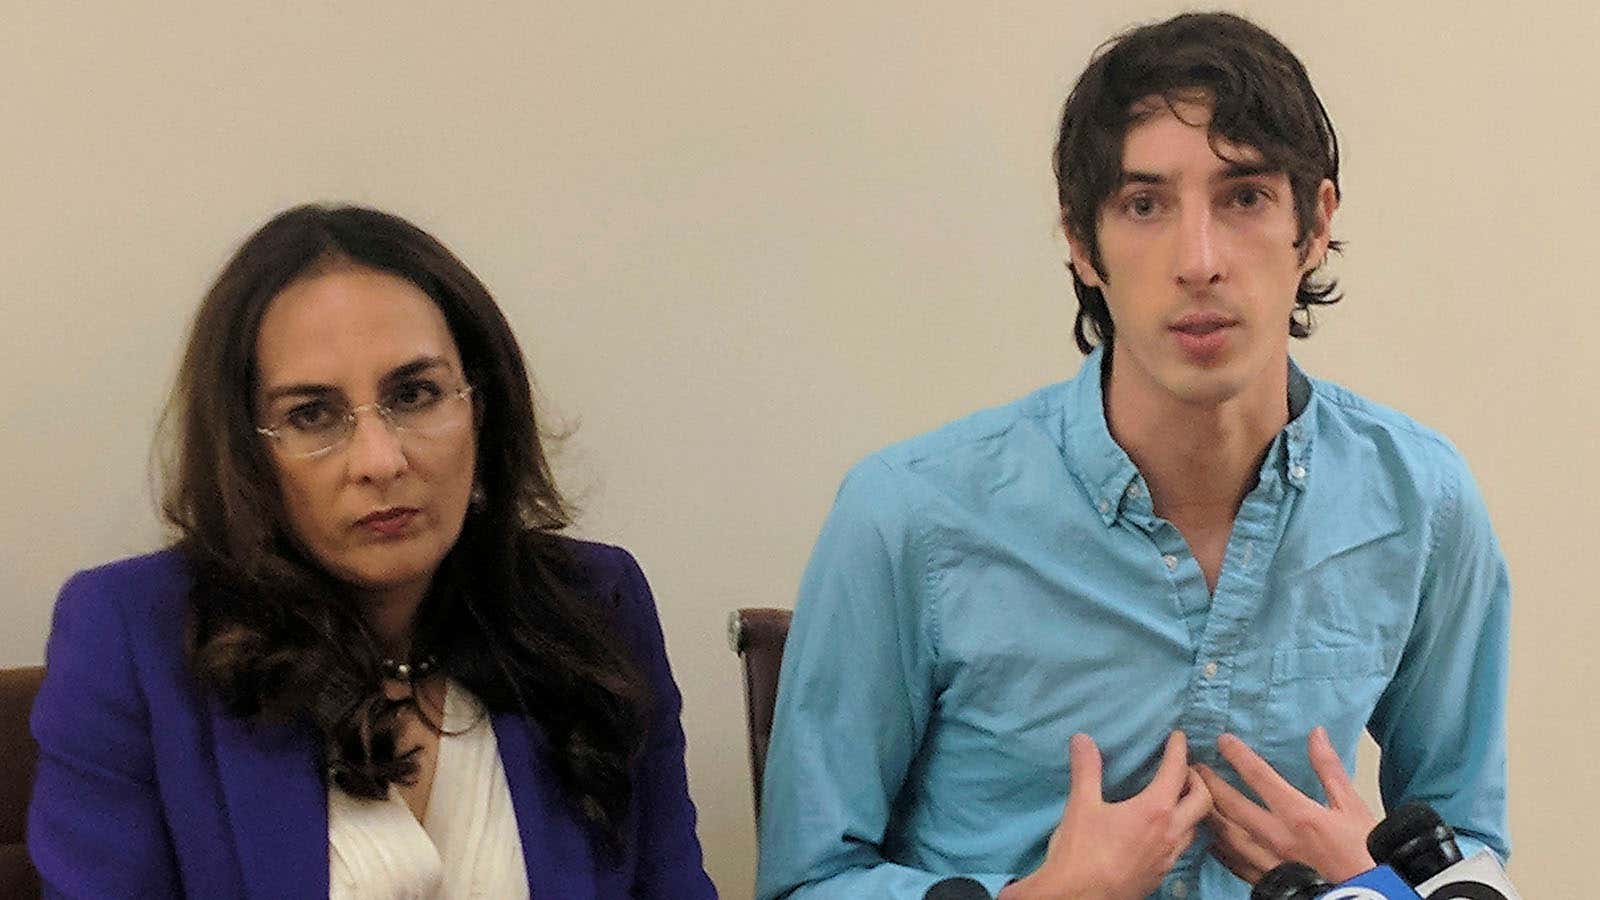 James Damore, right, a former Google engineer fired in 2017 after writing a memo about the biological differences between men and women, speaks at a news conference while his attorney, Harmeet Dhillon, listens, Monday, Jan. 8, 2018, in San Francisco. Damore discussed his lawsuit alleging that Google discriminates against workers with conservative opinions. (AP Photo/Michael Liedtke)